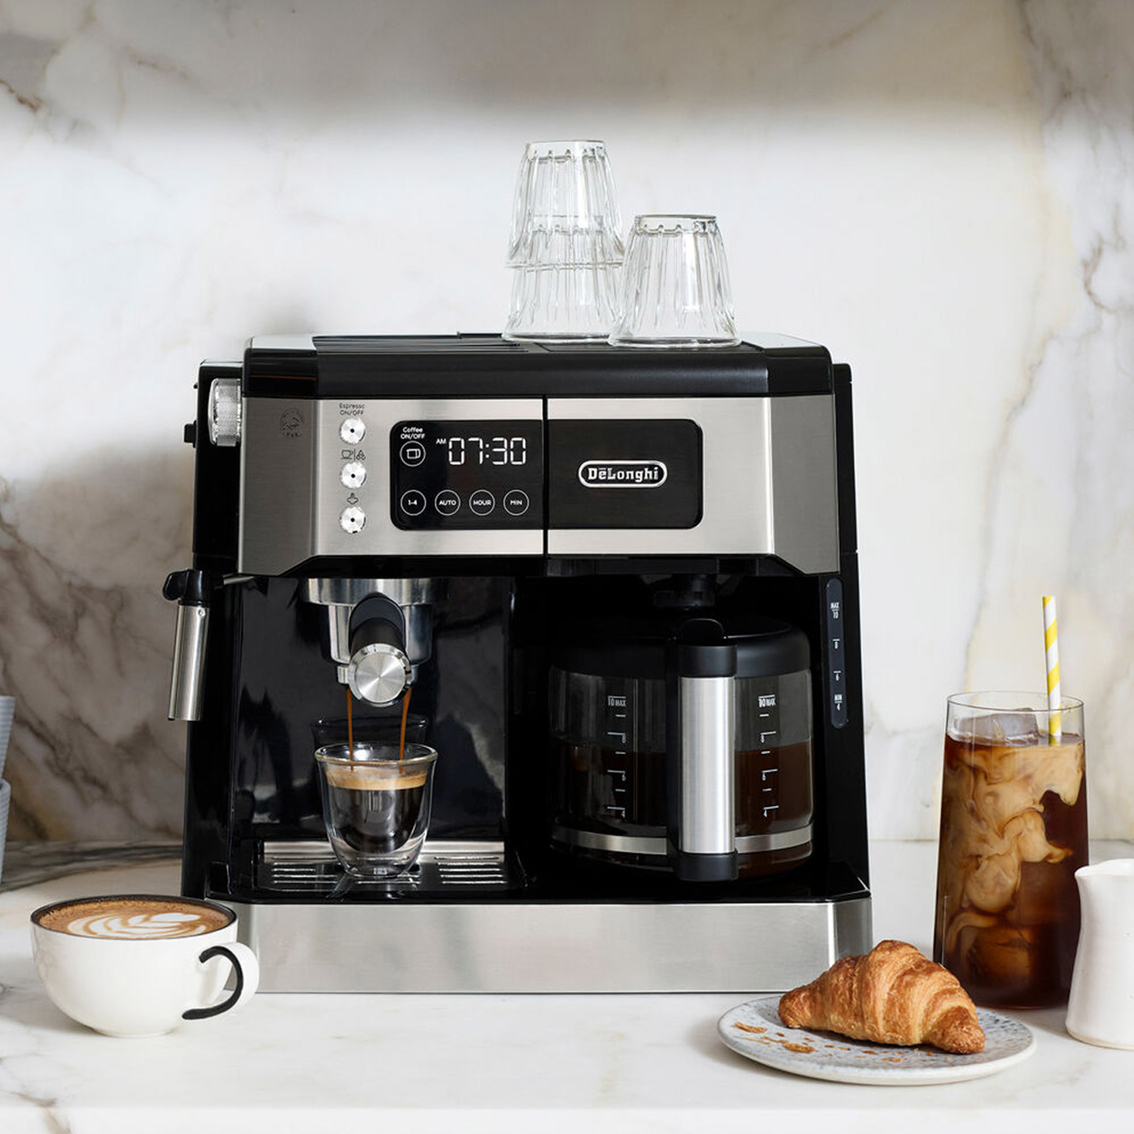 De'Longhi All-In-One Combination Coffee and Espresso Machine - Image 3 of 6